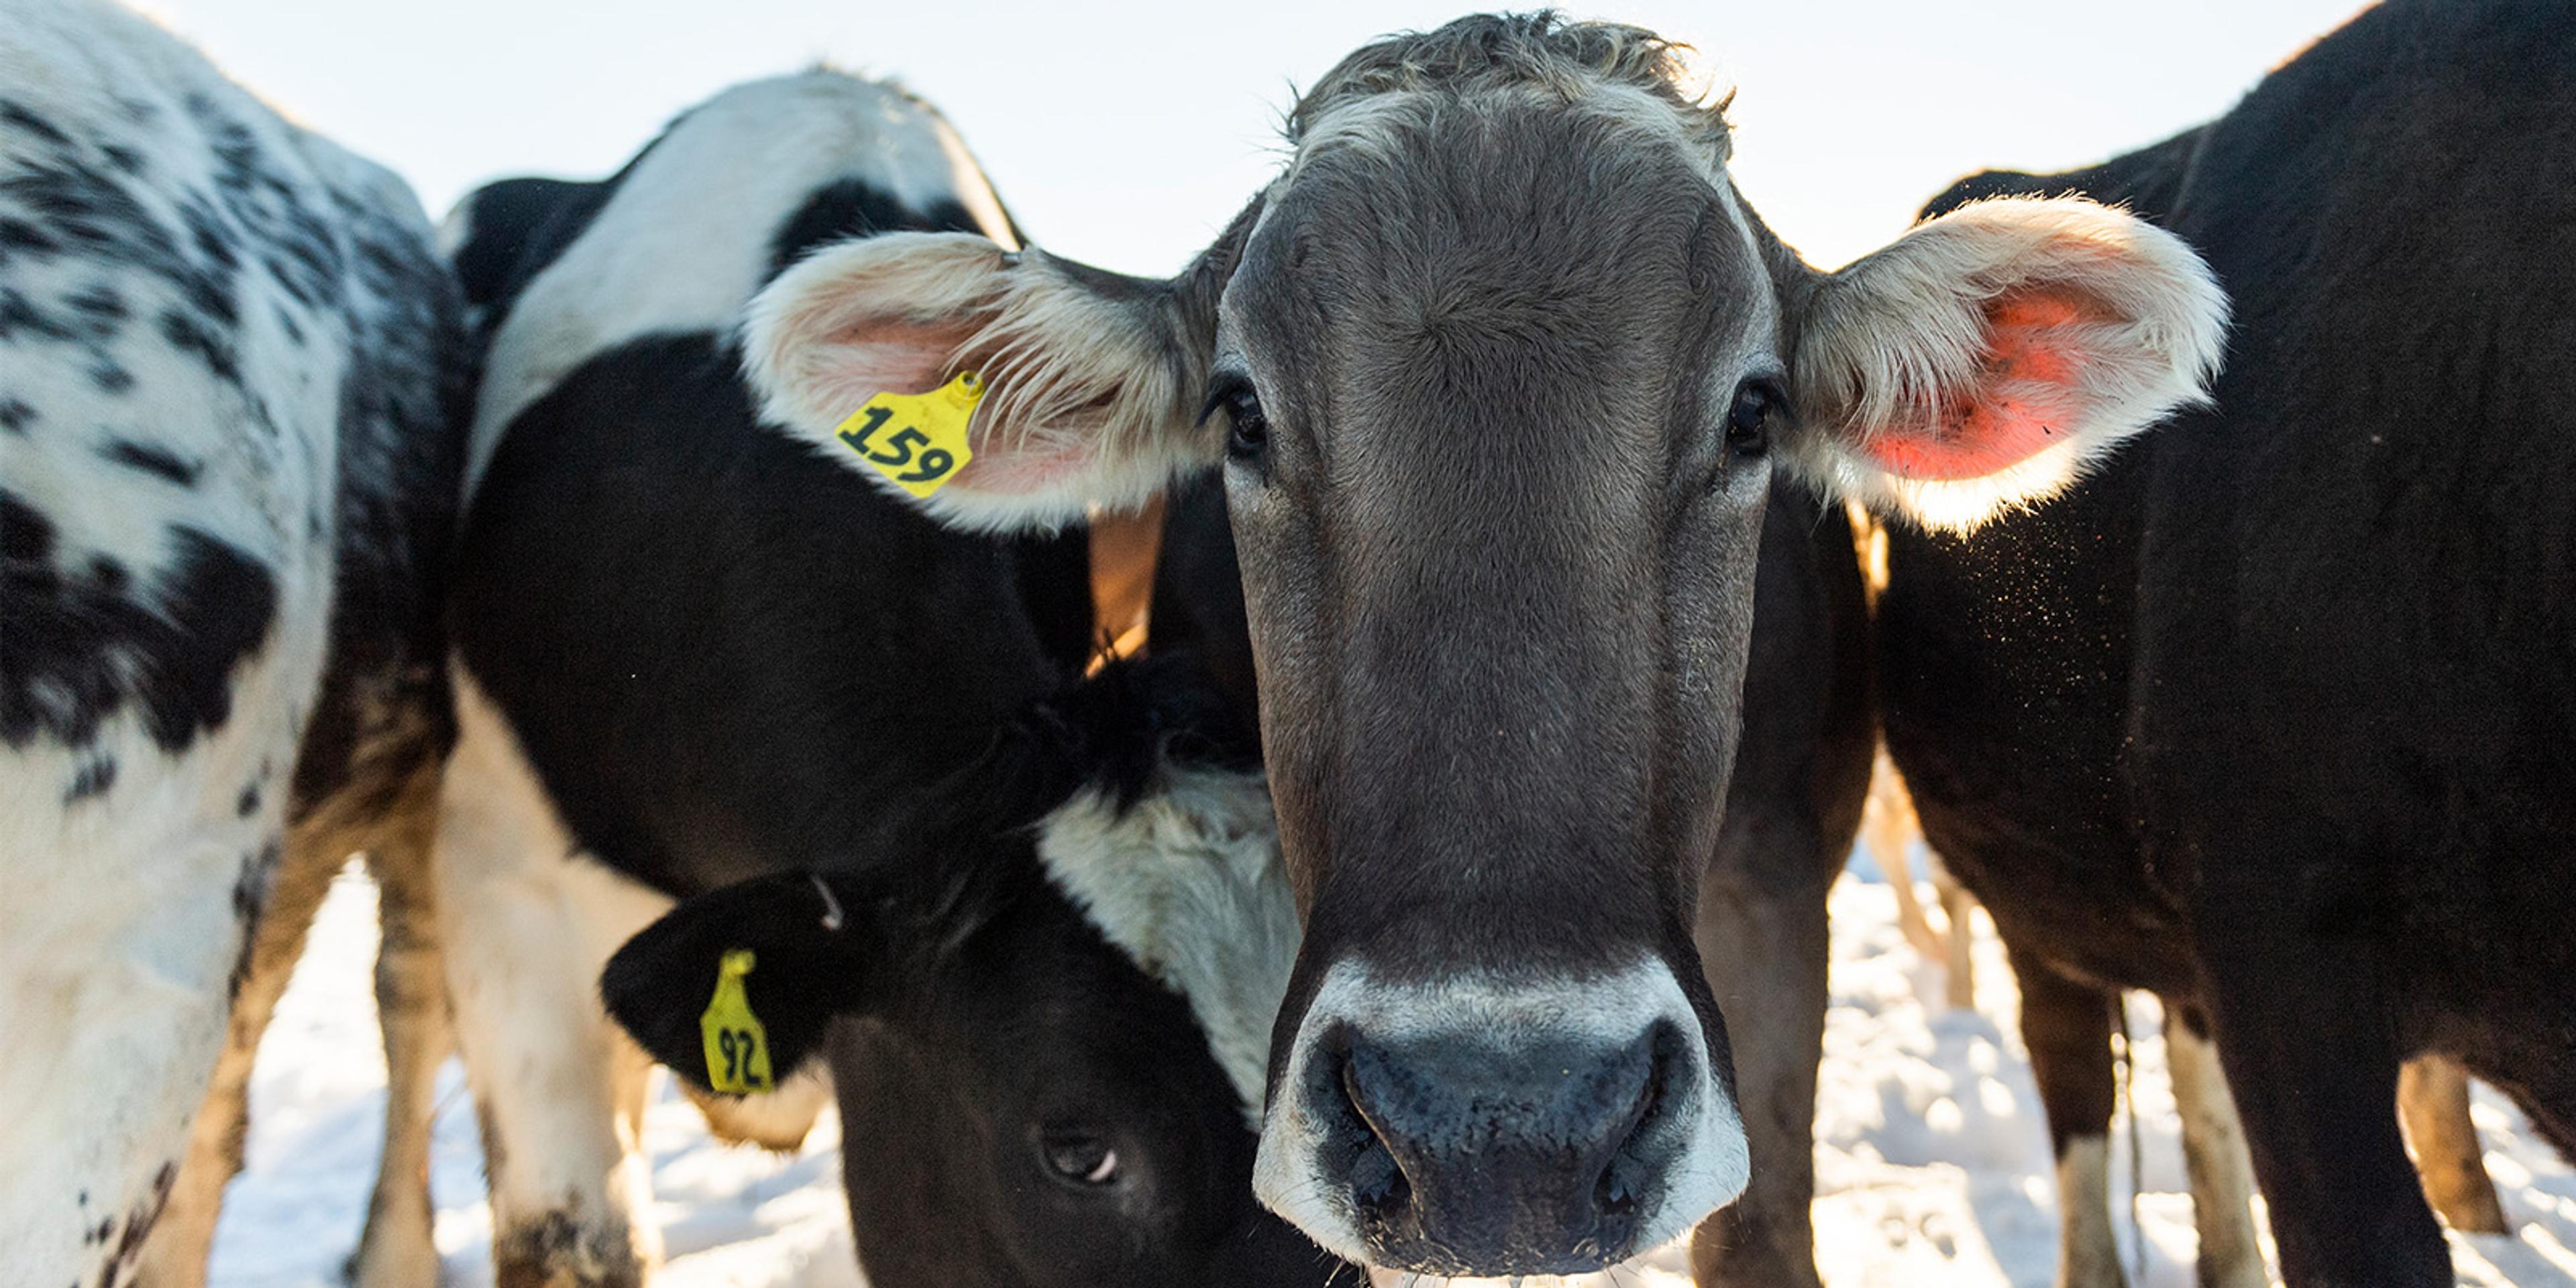 Two cows look at the camera in a snow-covered field at the Gearing farm in Wisconsin.